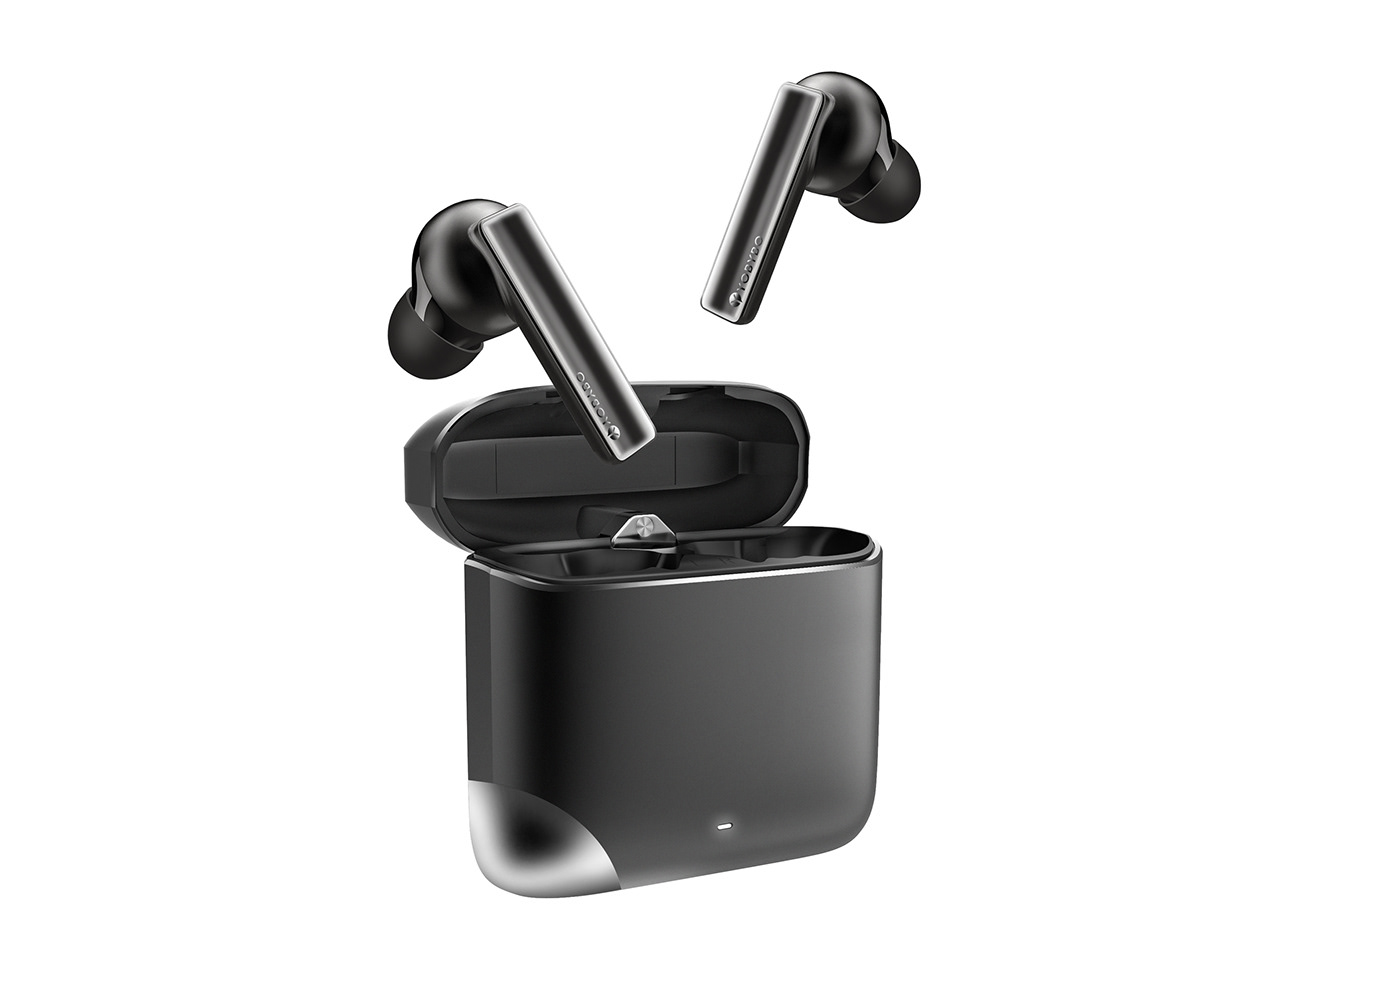 cmf product design  cool earphone glass 3C headset 耳机 Earbuds